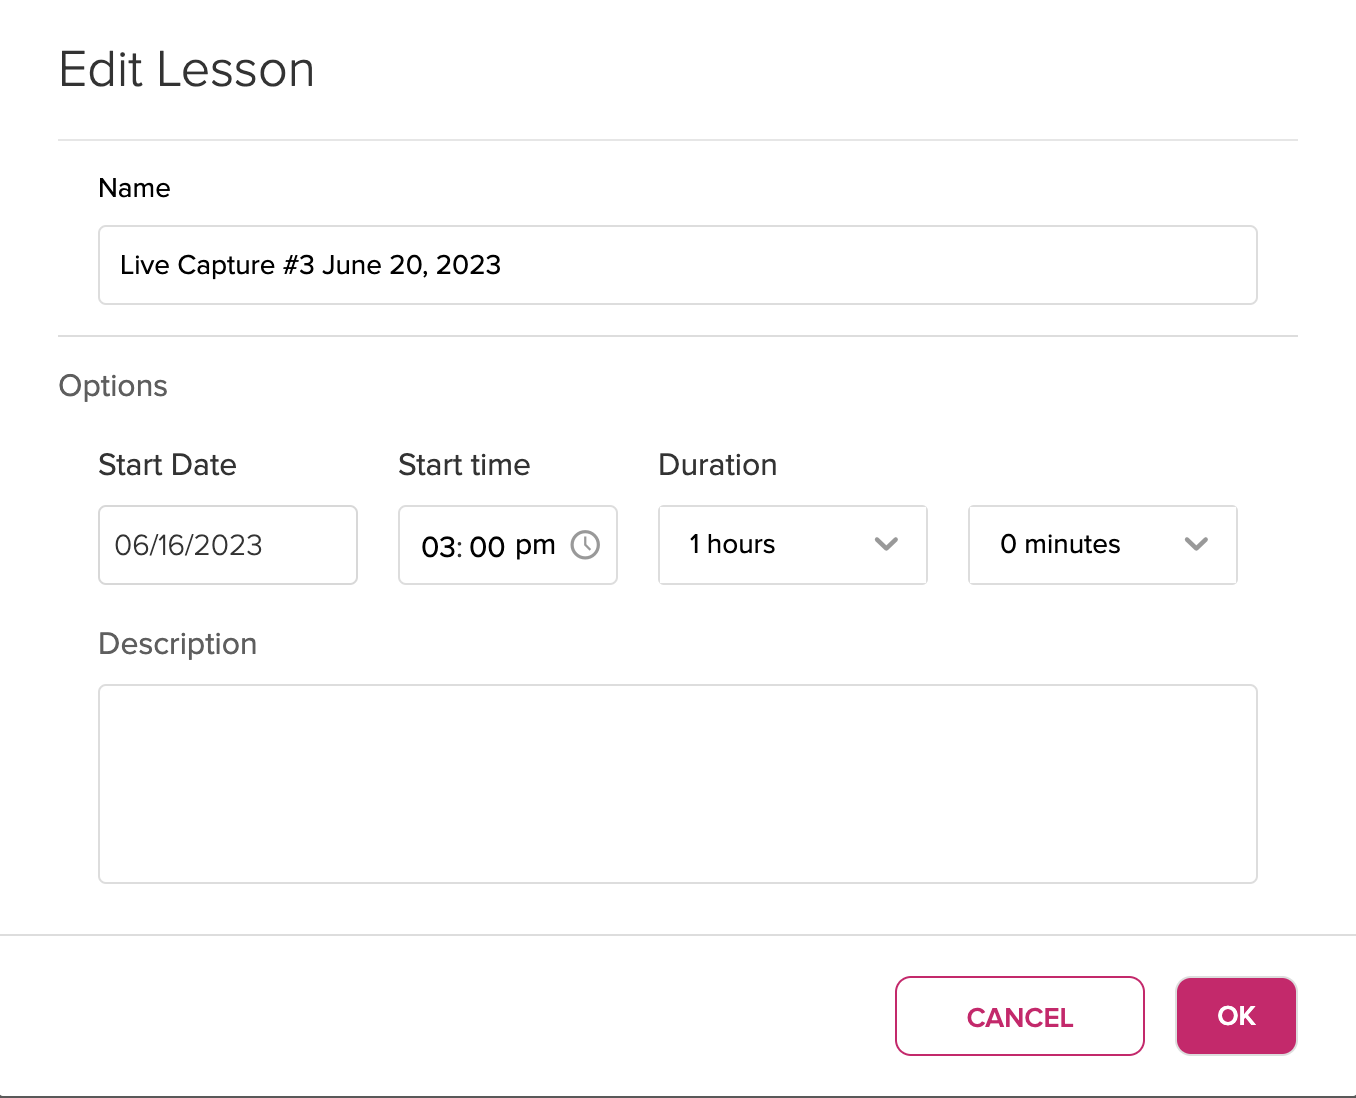 Edit lesson dialog box with fields for steps as described